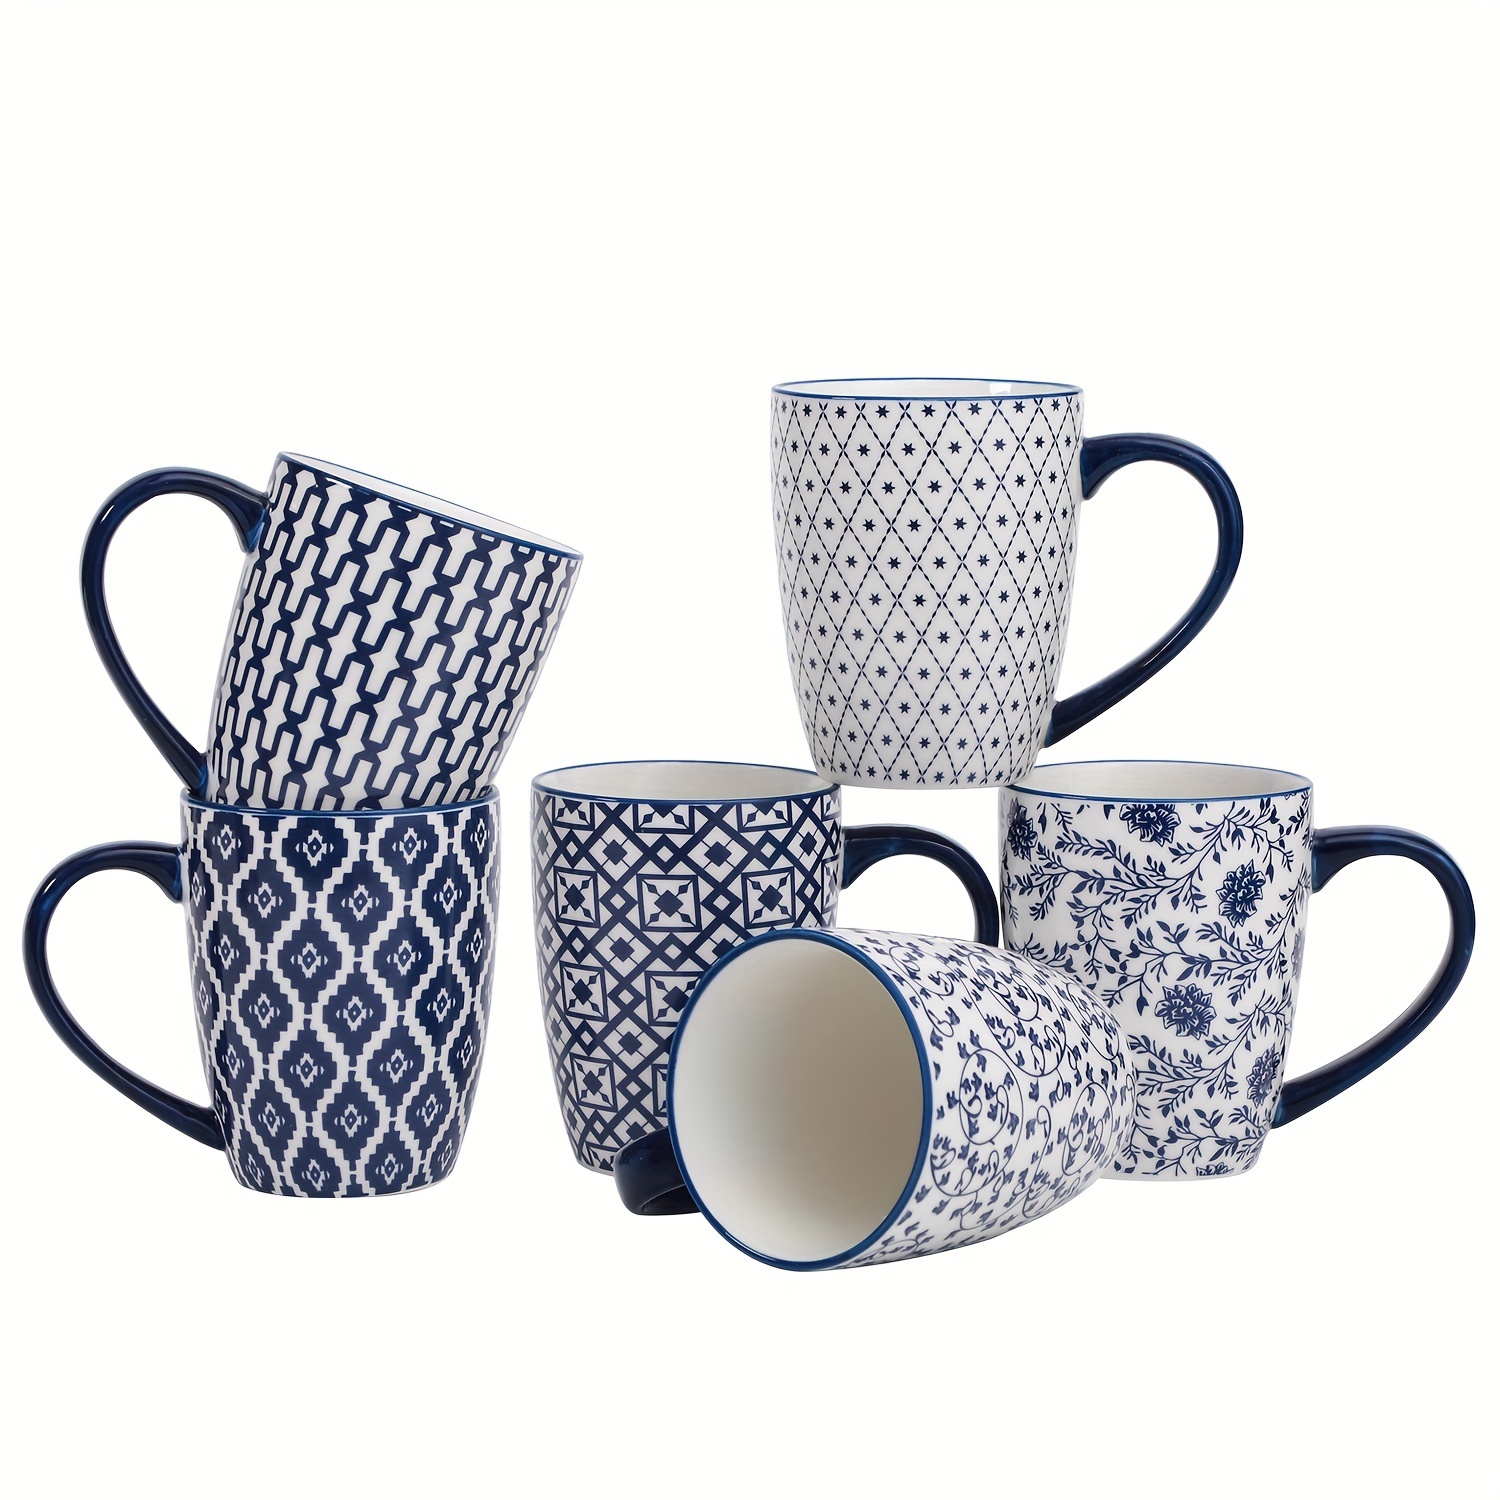 

6pcs, Cerkik Ceramic Coffee Mugs Set, 16 Ounce Large Porcelain Tea Cups With Handle For Women, Men, Latte, Cocoa, Cappuccino, Gift, Christmas, Housewarming, Microwave Dishwasher Safe, Vintage Blue